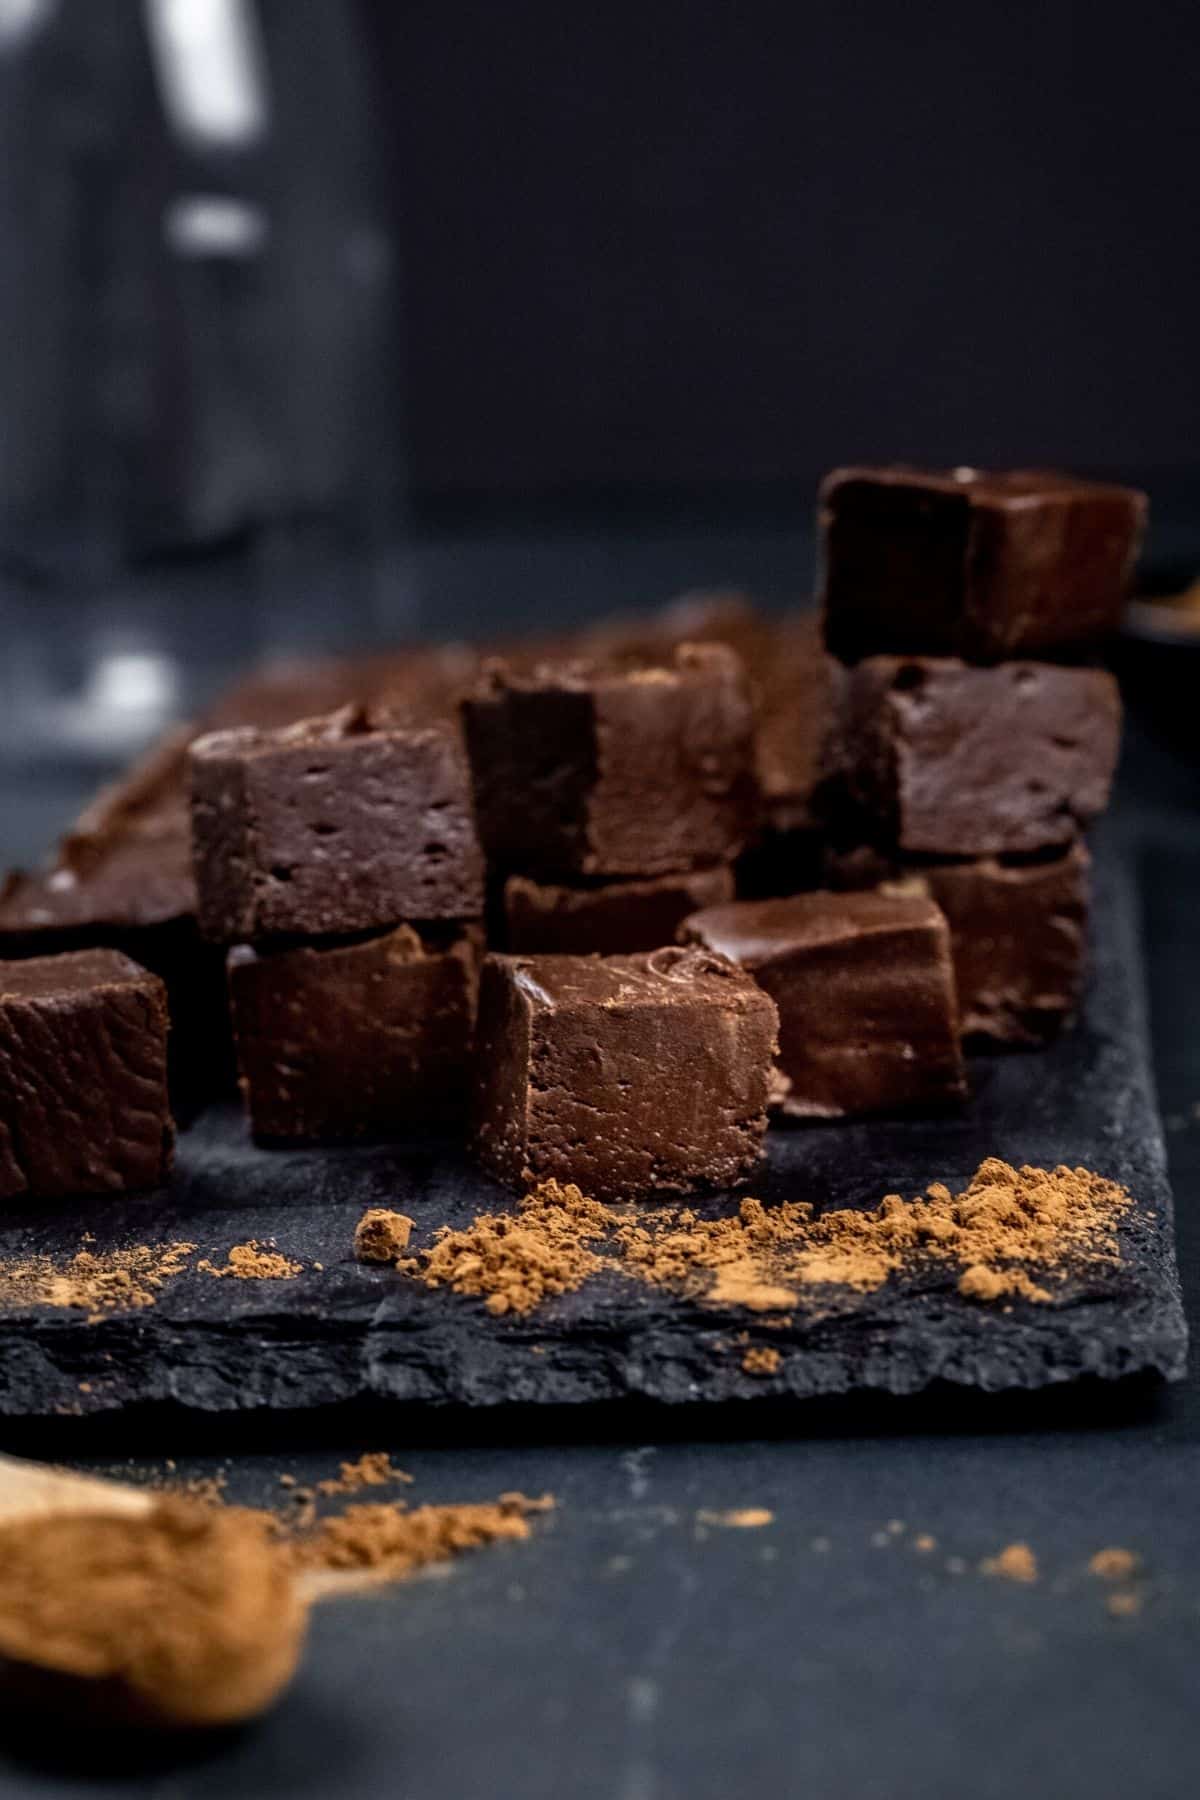 stacks of vegan chocolate fudge on a dark serving tray. the fudge is cut into little cubes. fresh cocoa powder is sprinkled around the fudge.